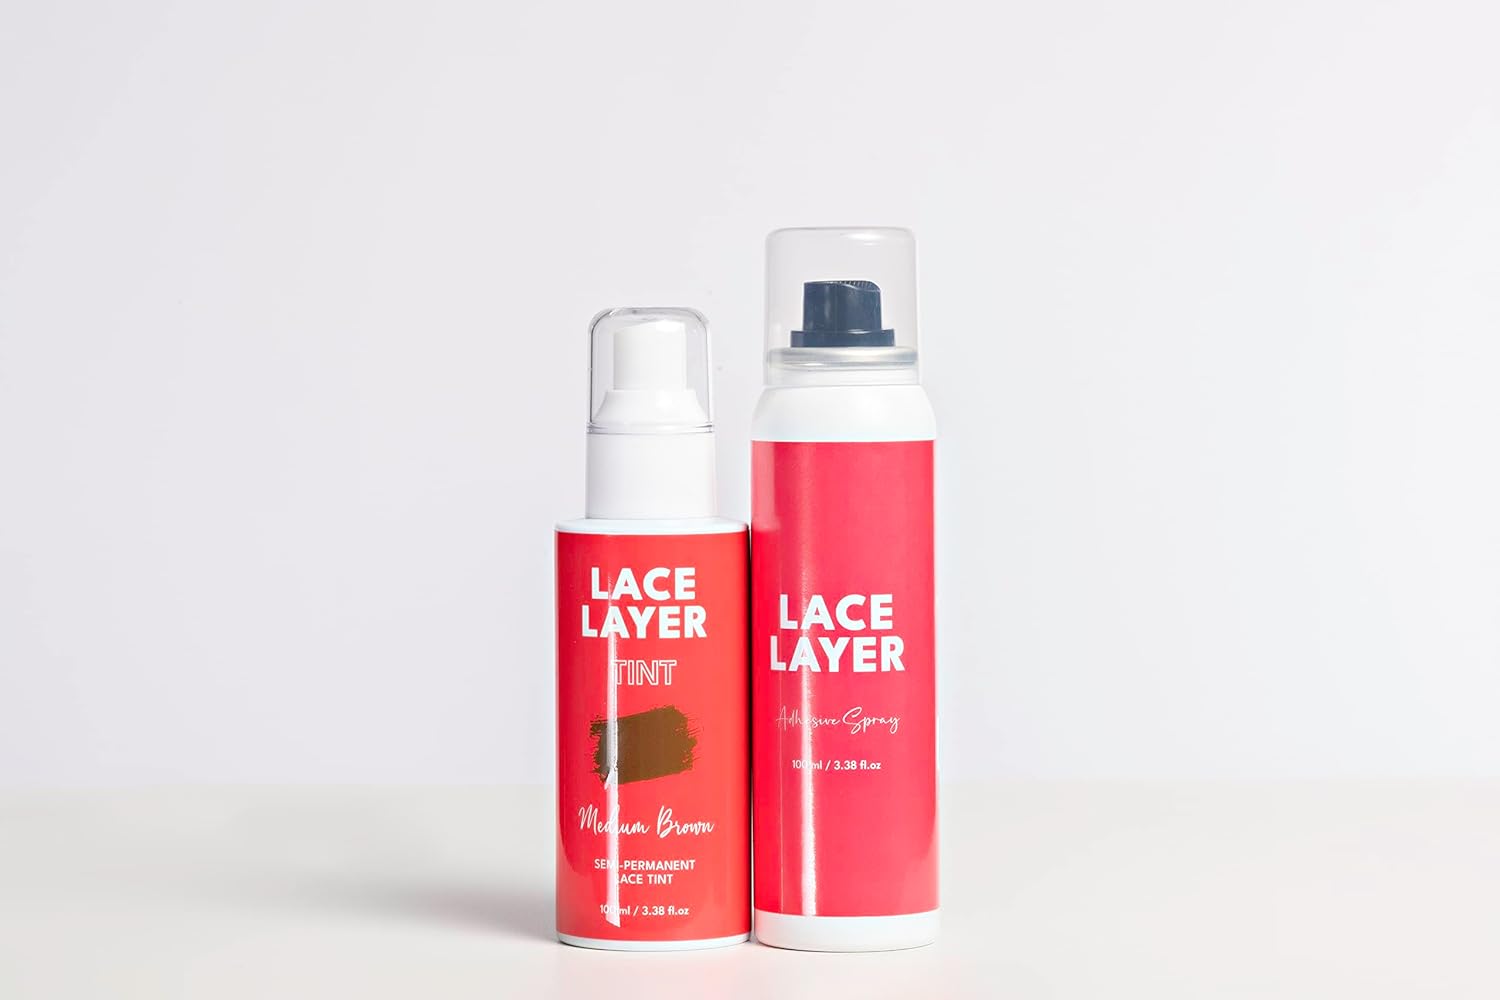 Lace Layer Freeze Spray and Tint Pictured together